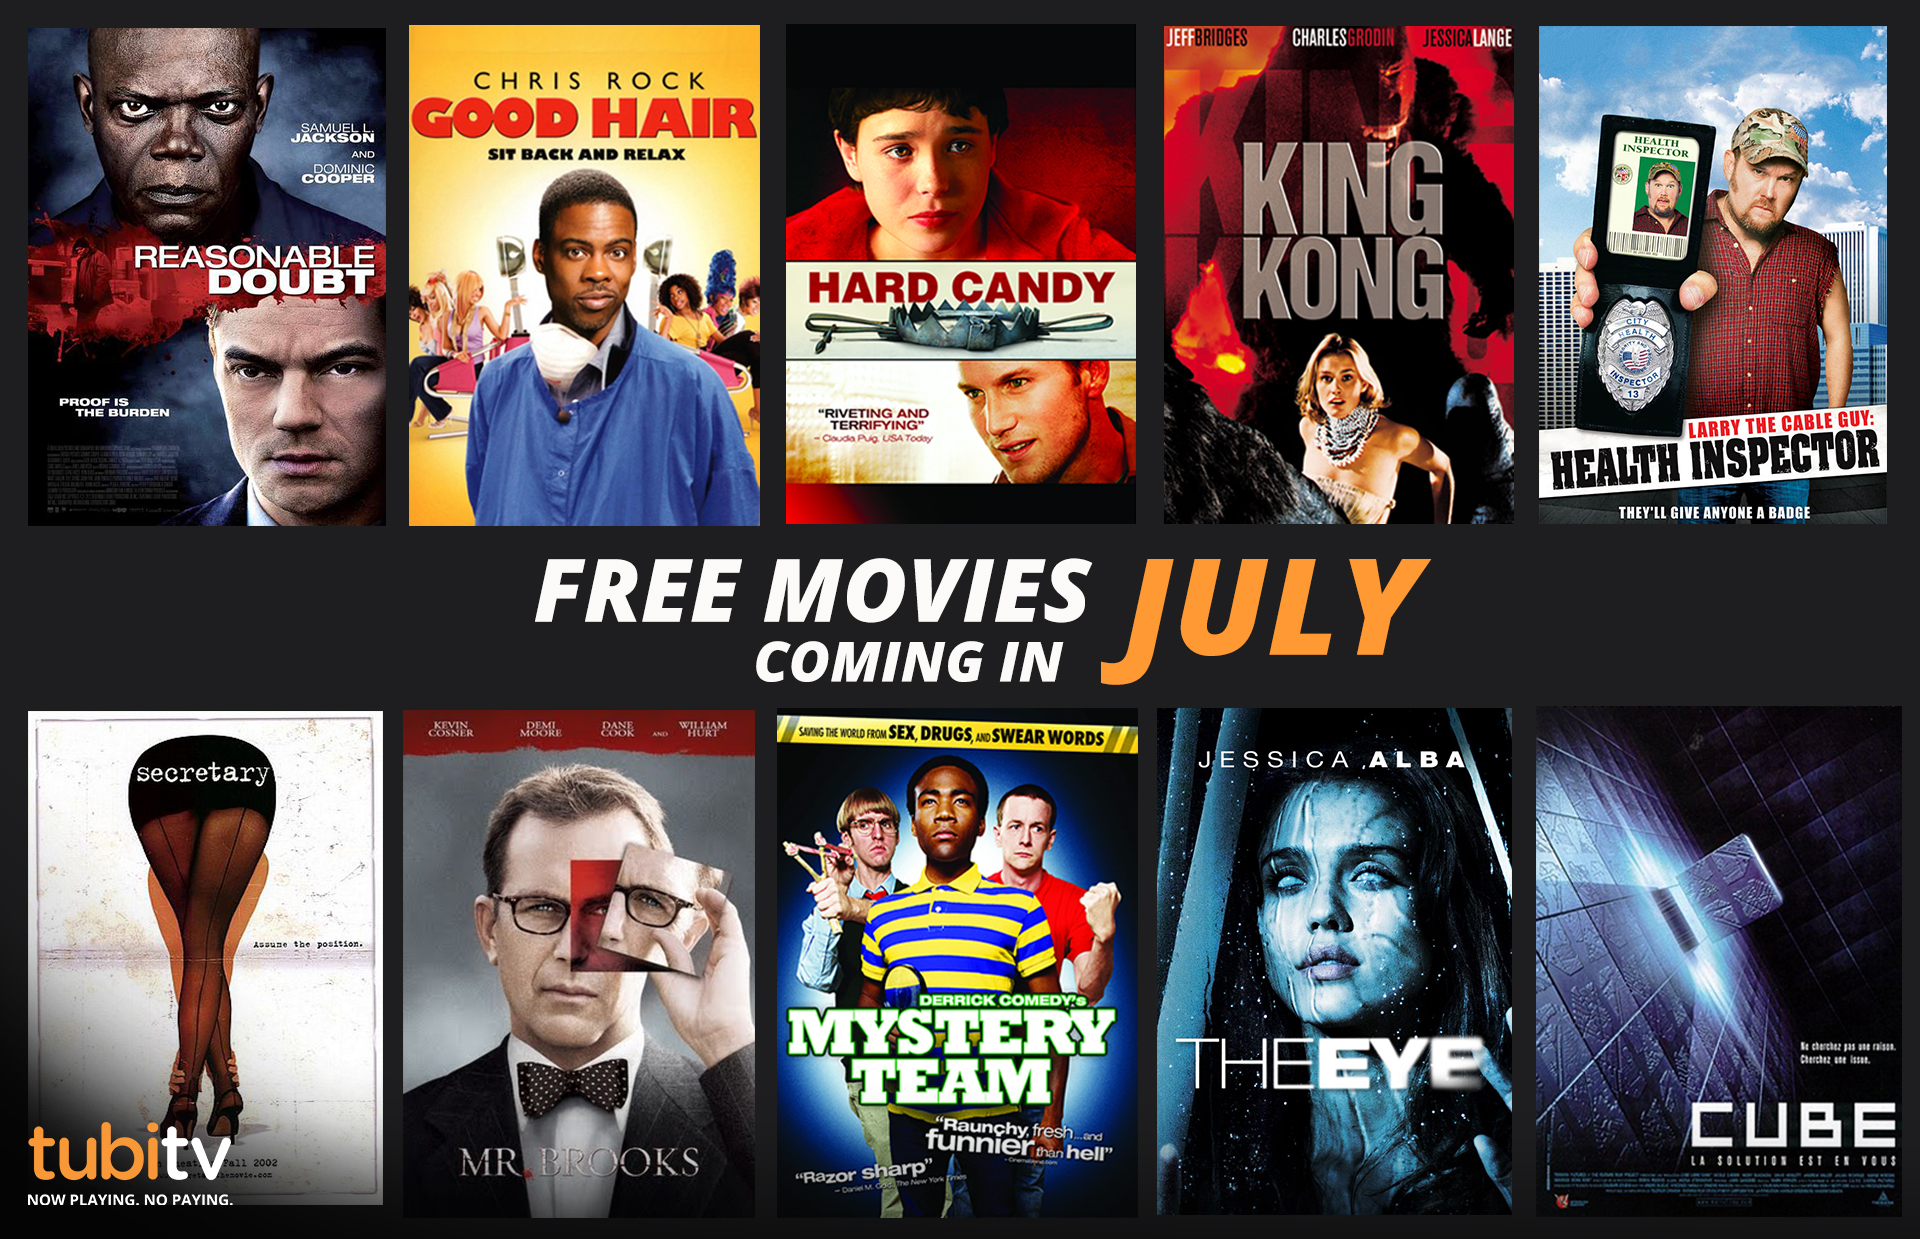 Here is Everything Coming For FREE to Tubi TV in July